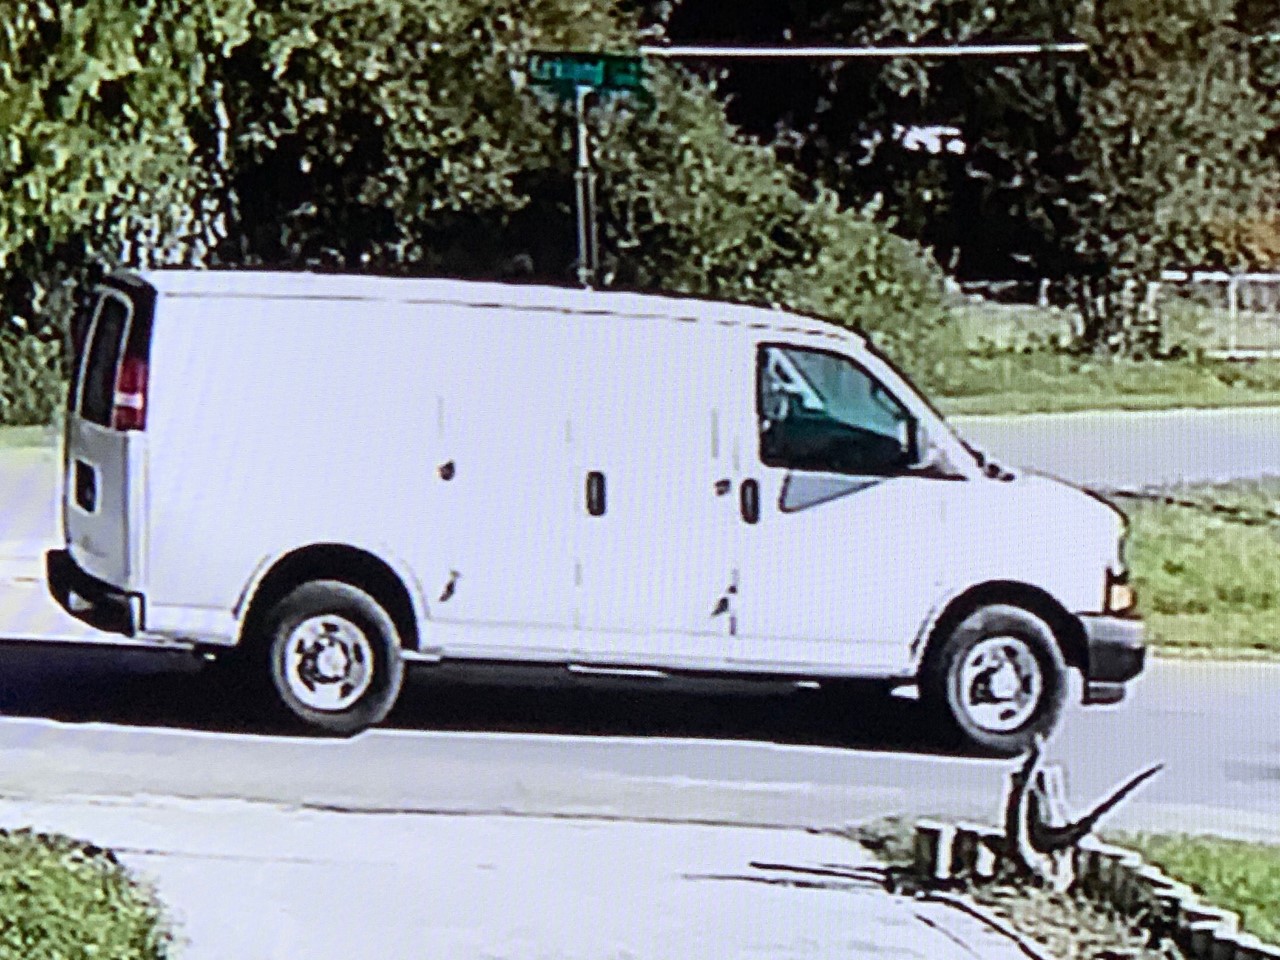 White van with suspicious message on side found abandoned